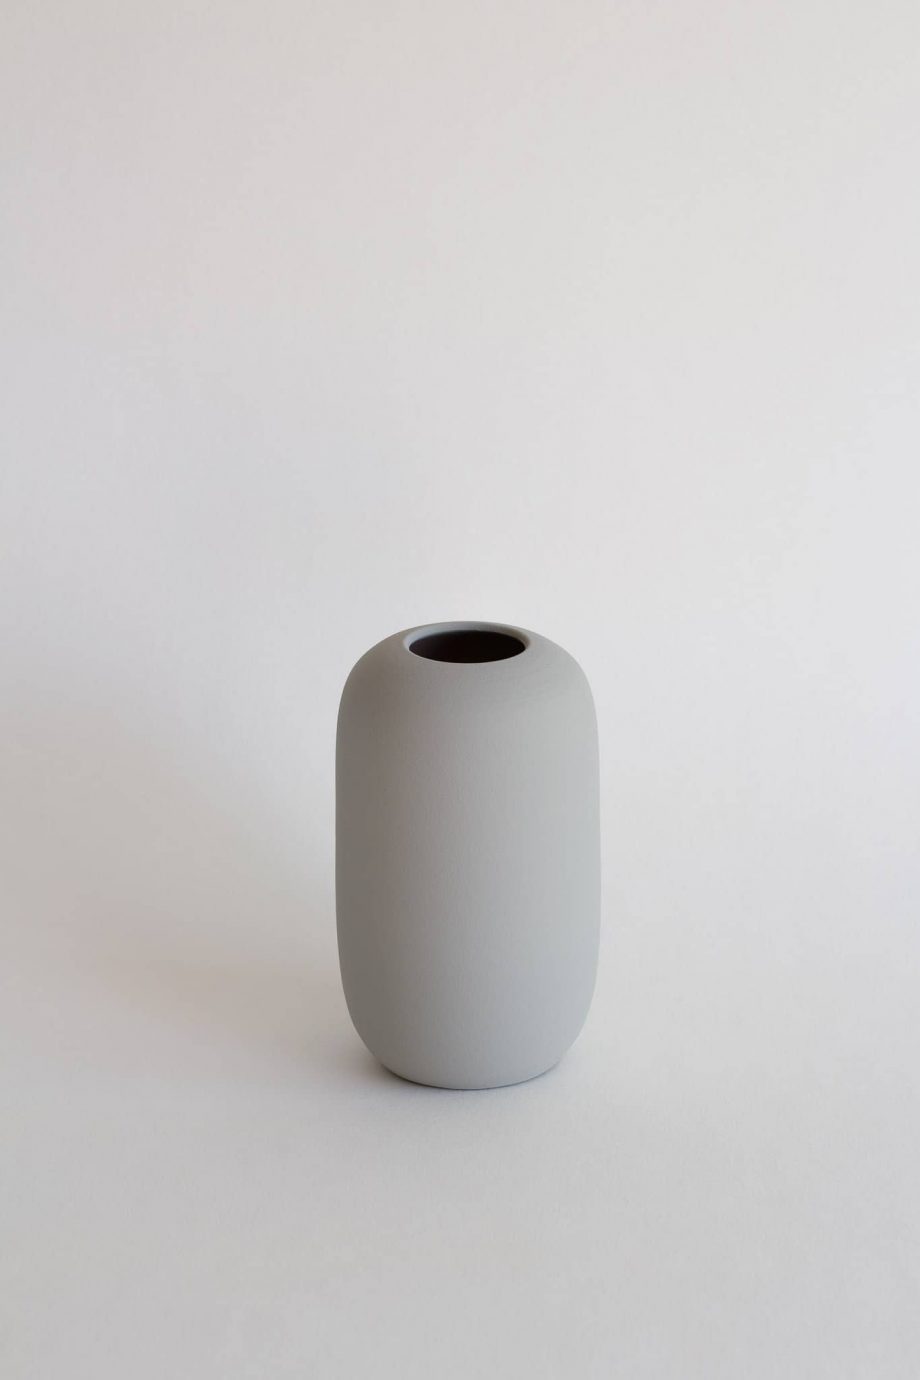 Decorative grey vase from the Portuguese home decoration brand o cactuu.